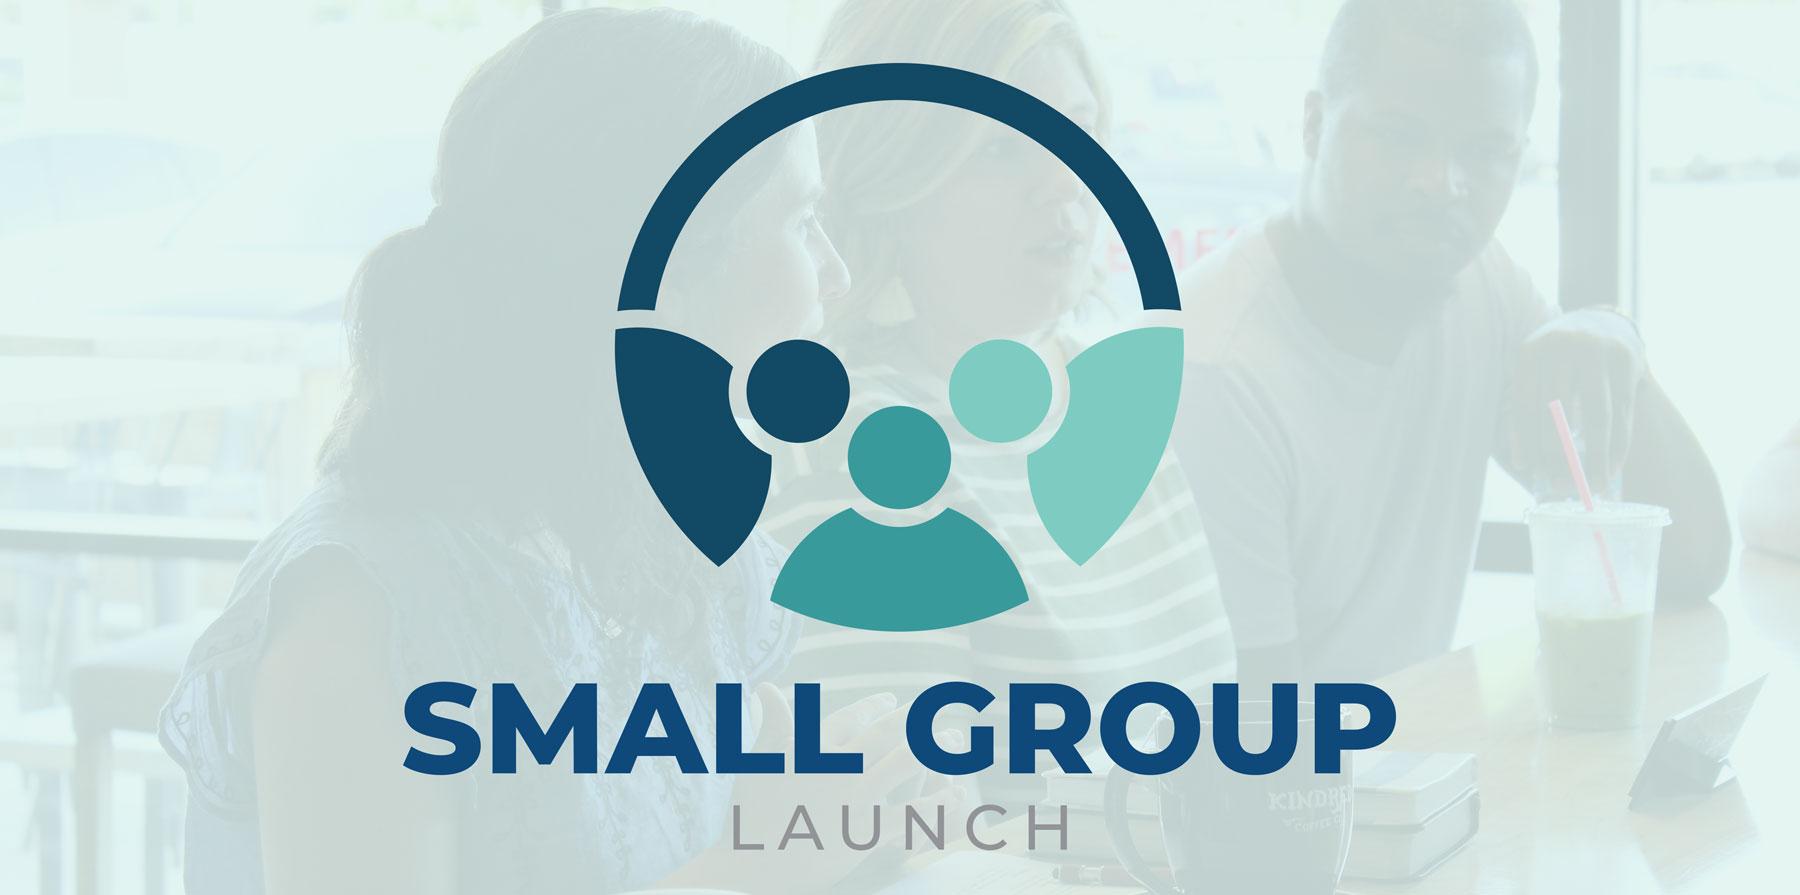 Small Group Logo - Small Group Launch United Methodist Church of Colleyville